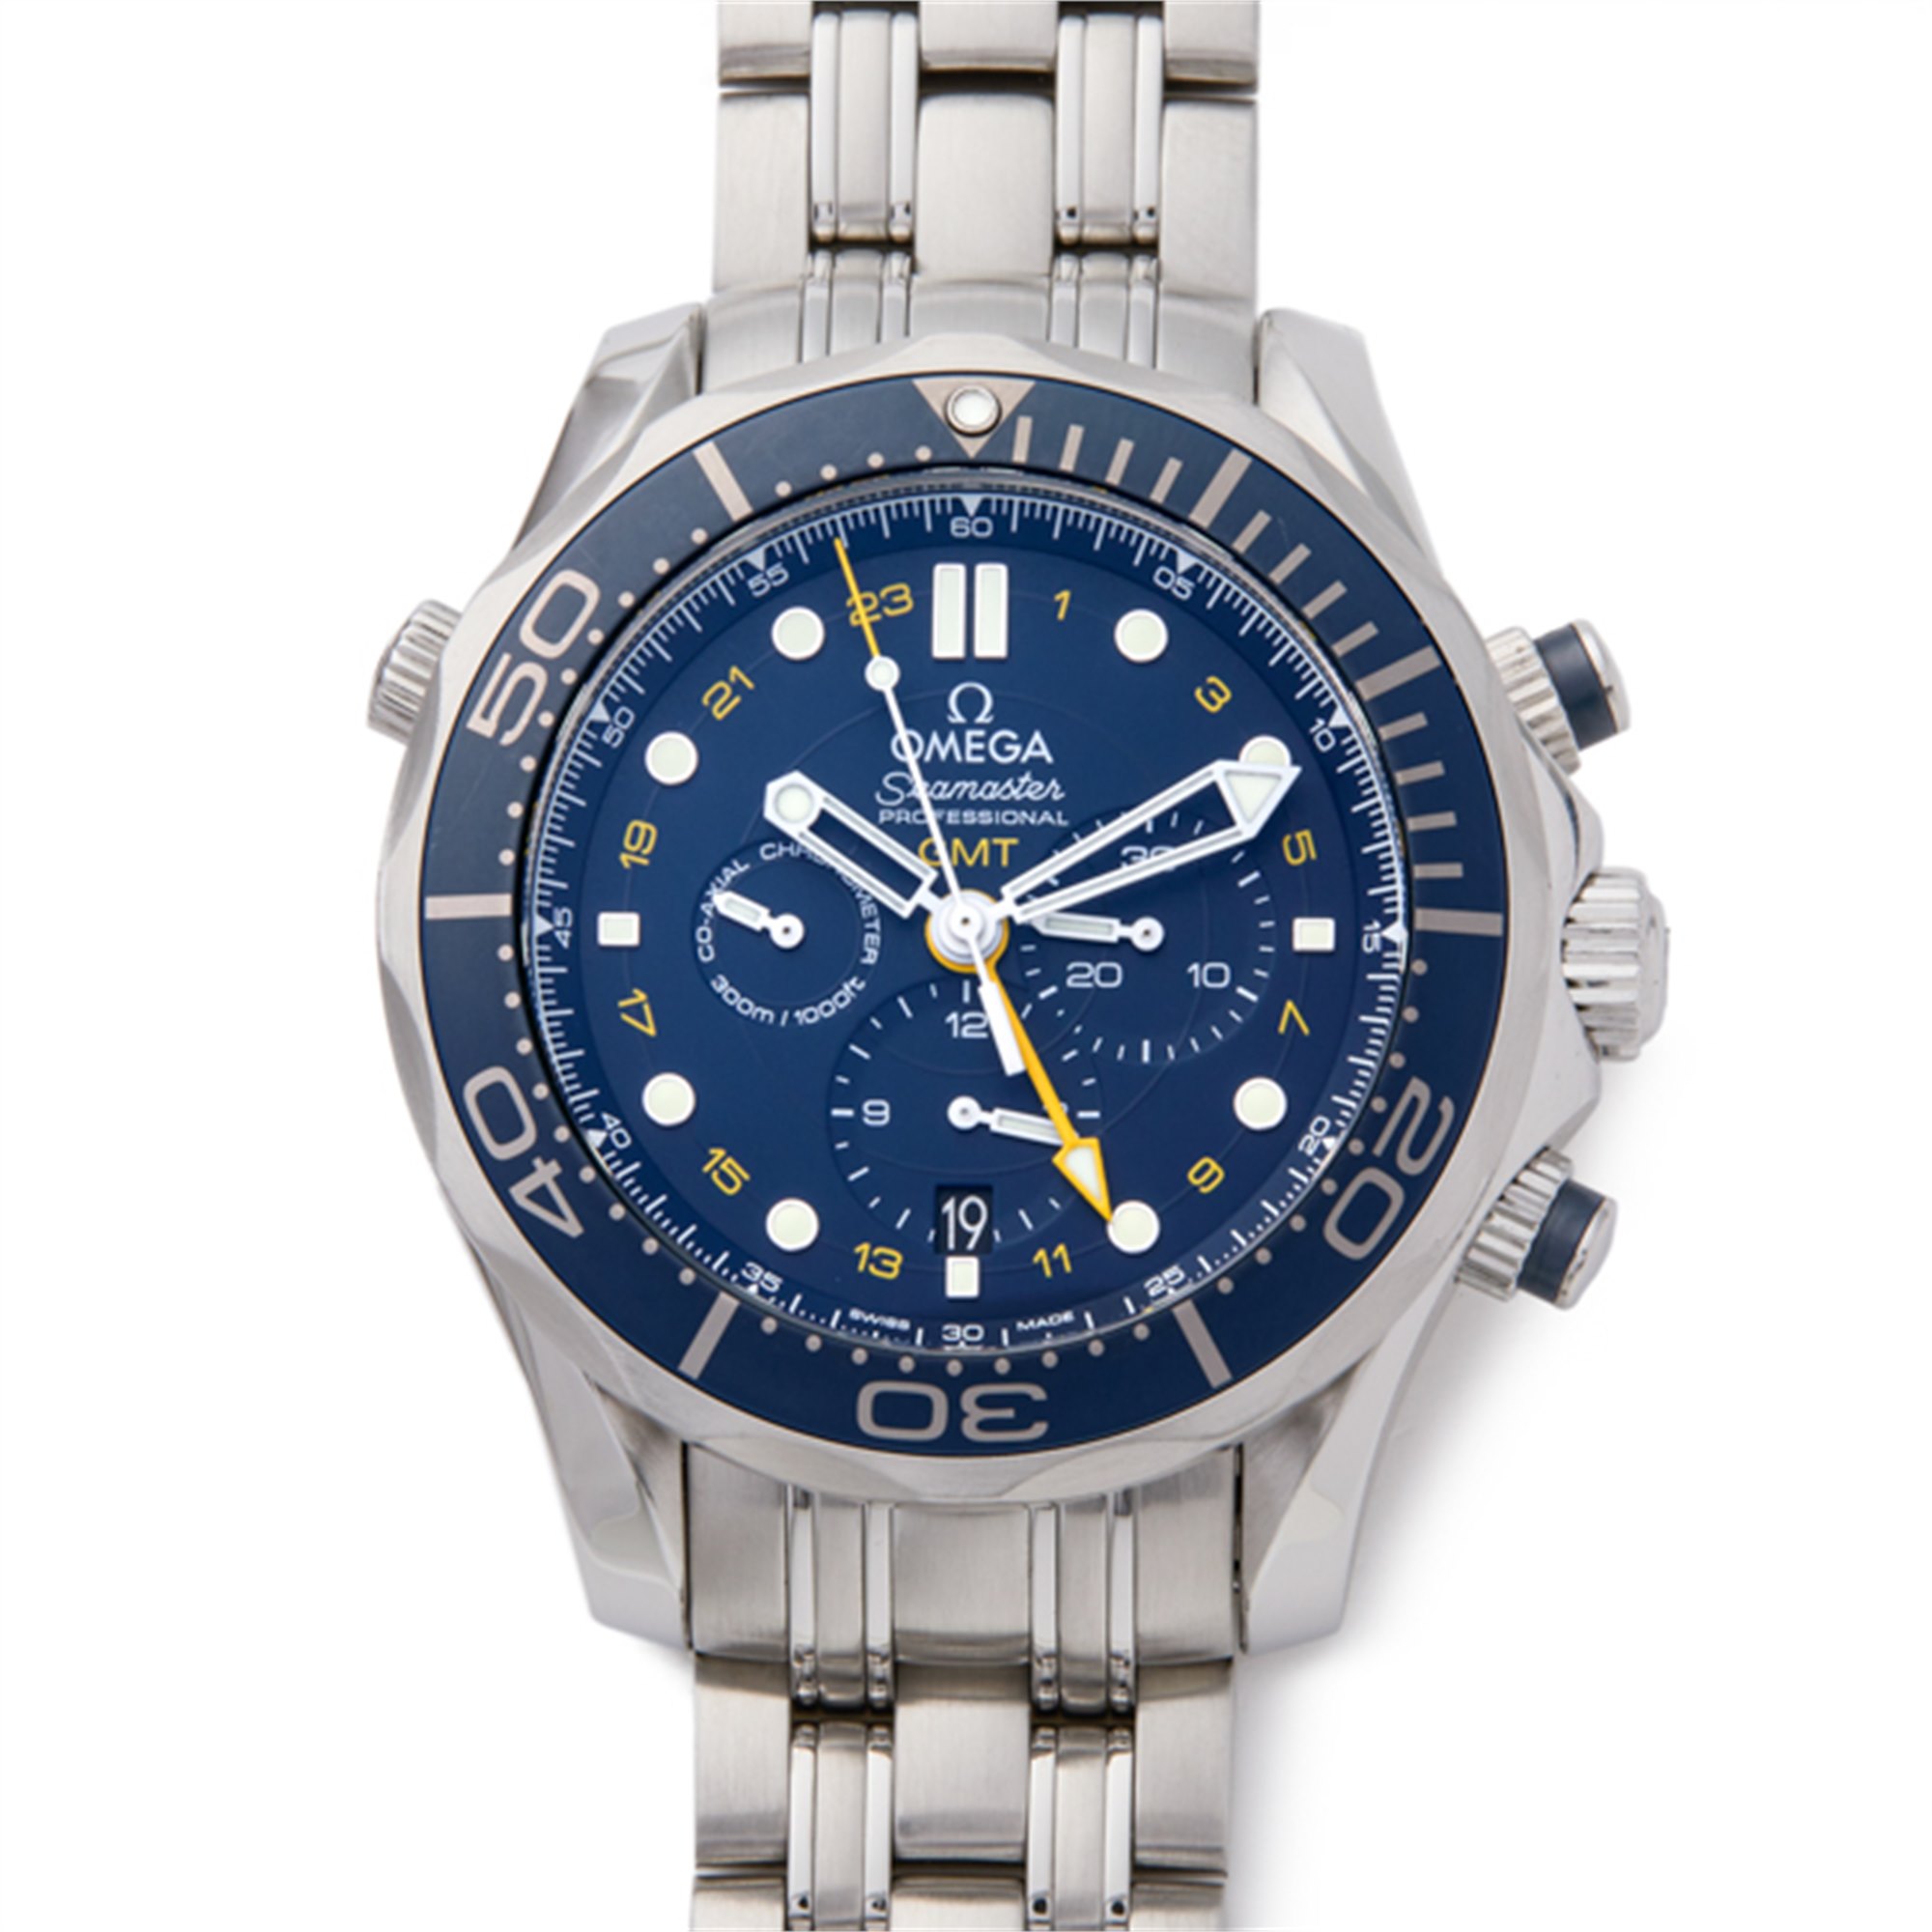 Omega Seamaster Chronograph GMT Stainless Steel 212.30.44.52.03.001